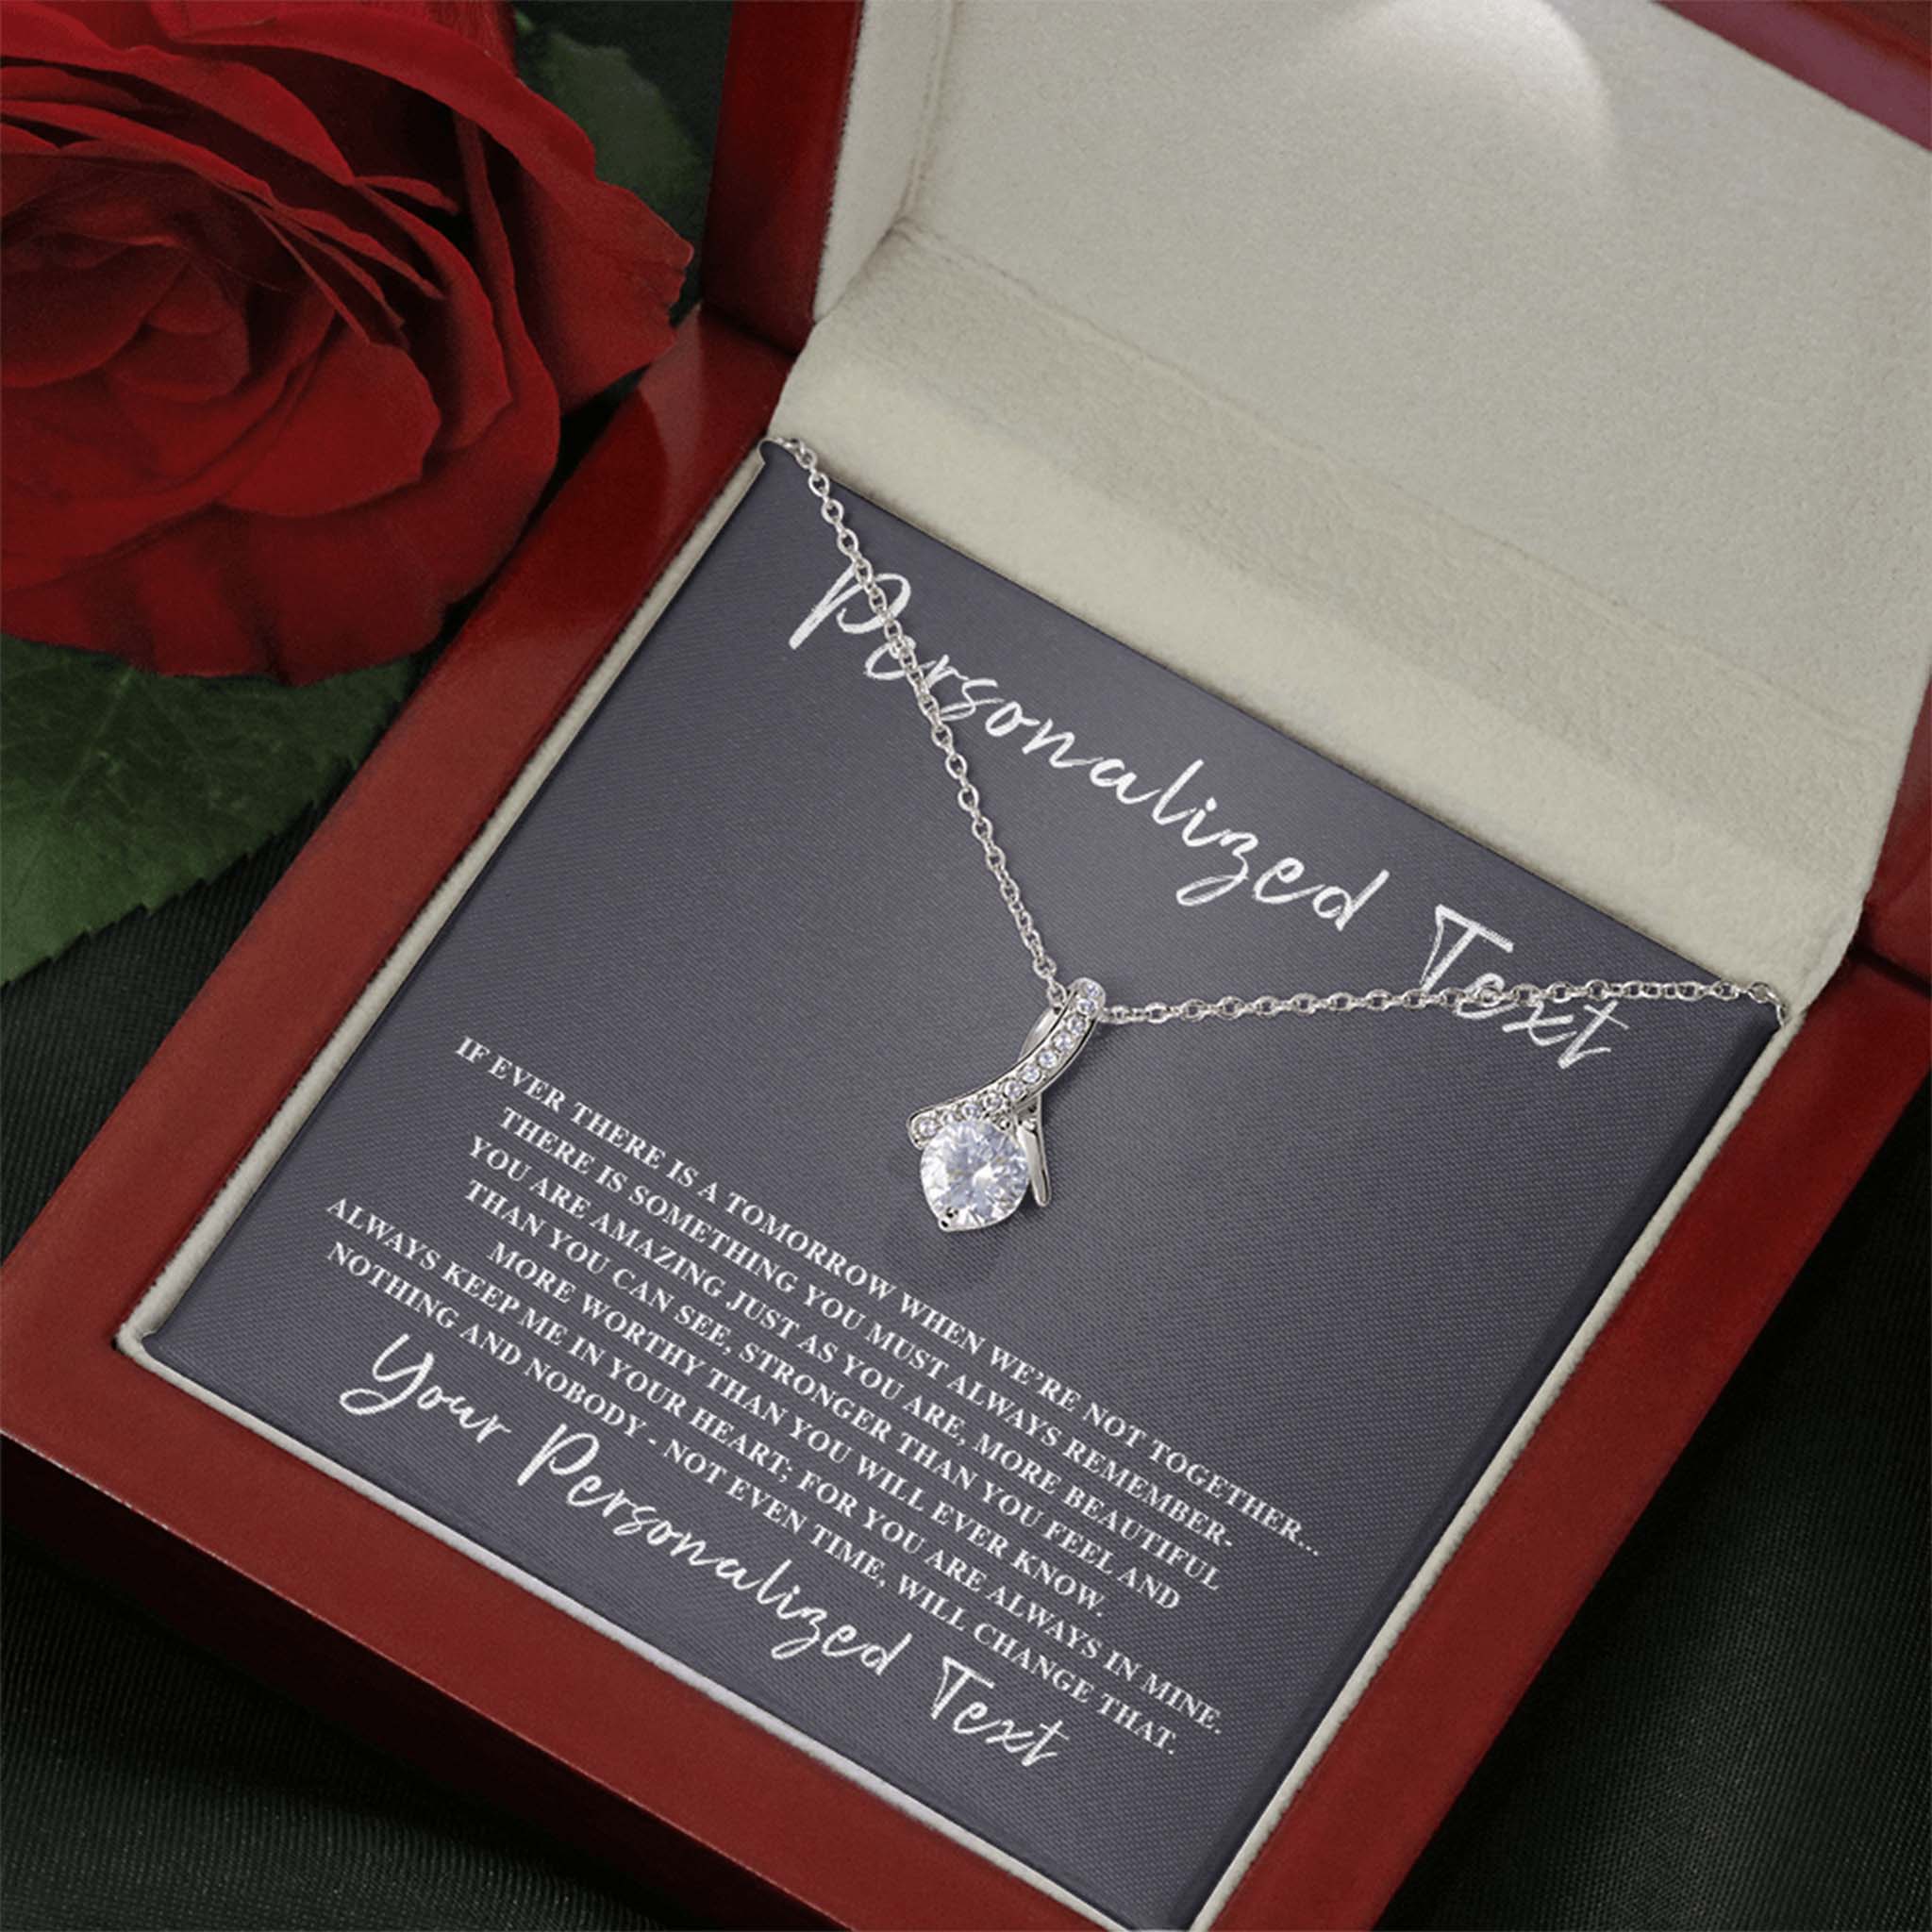 Alluring Beauty Necklace If Ever There Is a Tomorrow -Love Personalized Insert CardCustomly Gifts